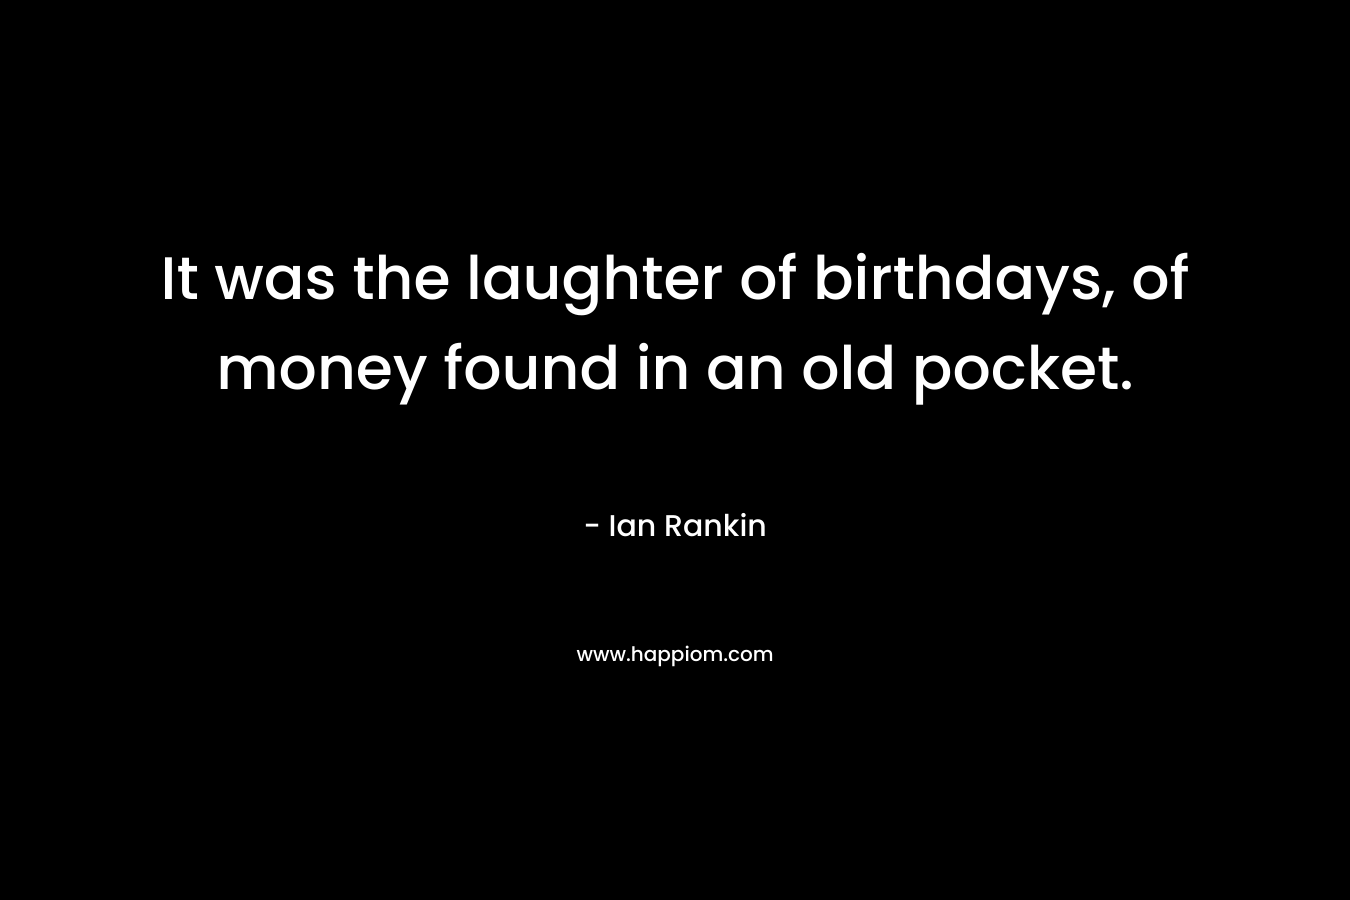 It was the laughter of birthdays, of money found in an old pocket. – Ian Rankin